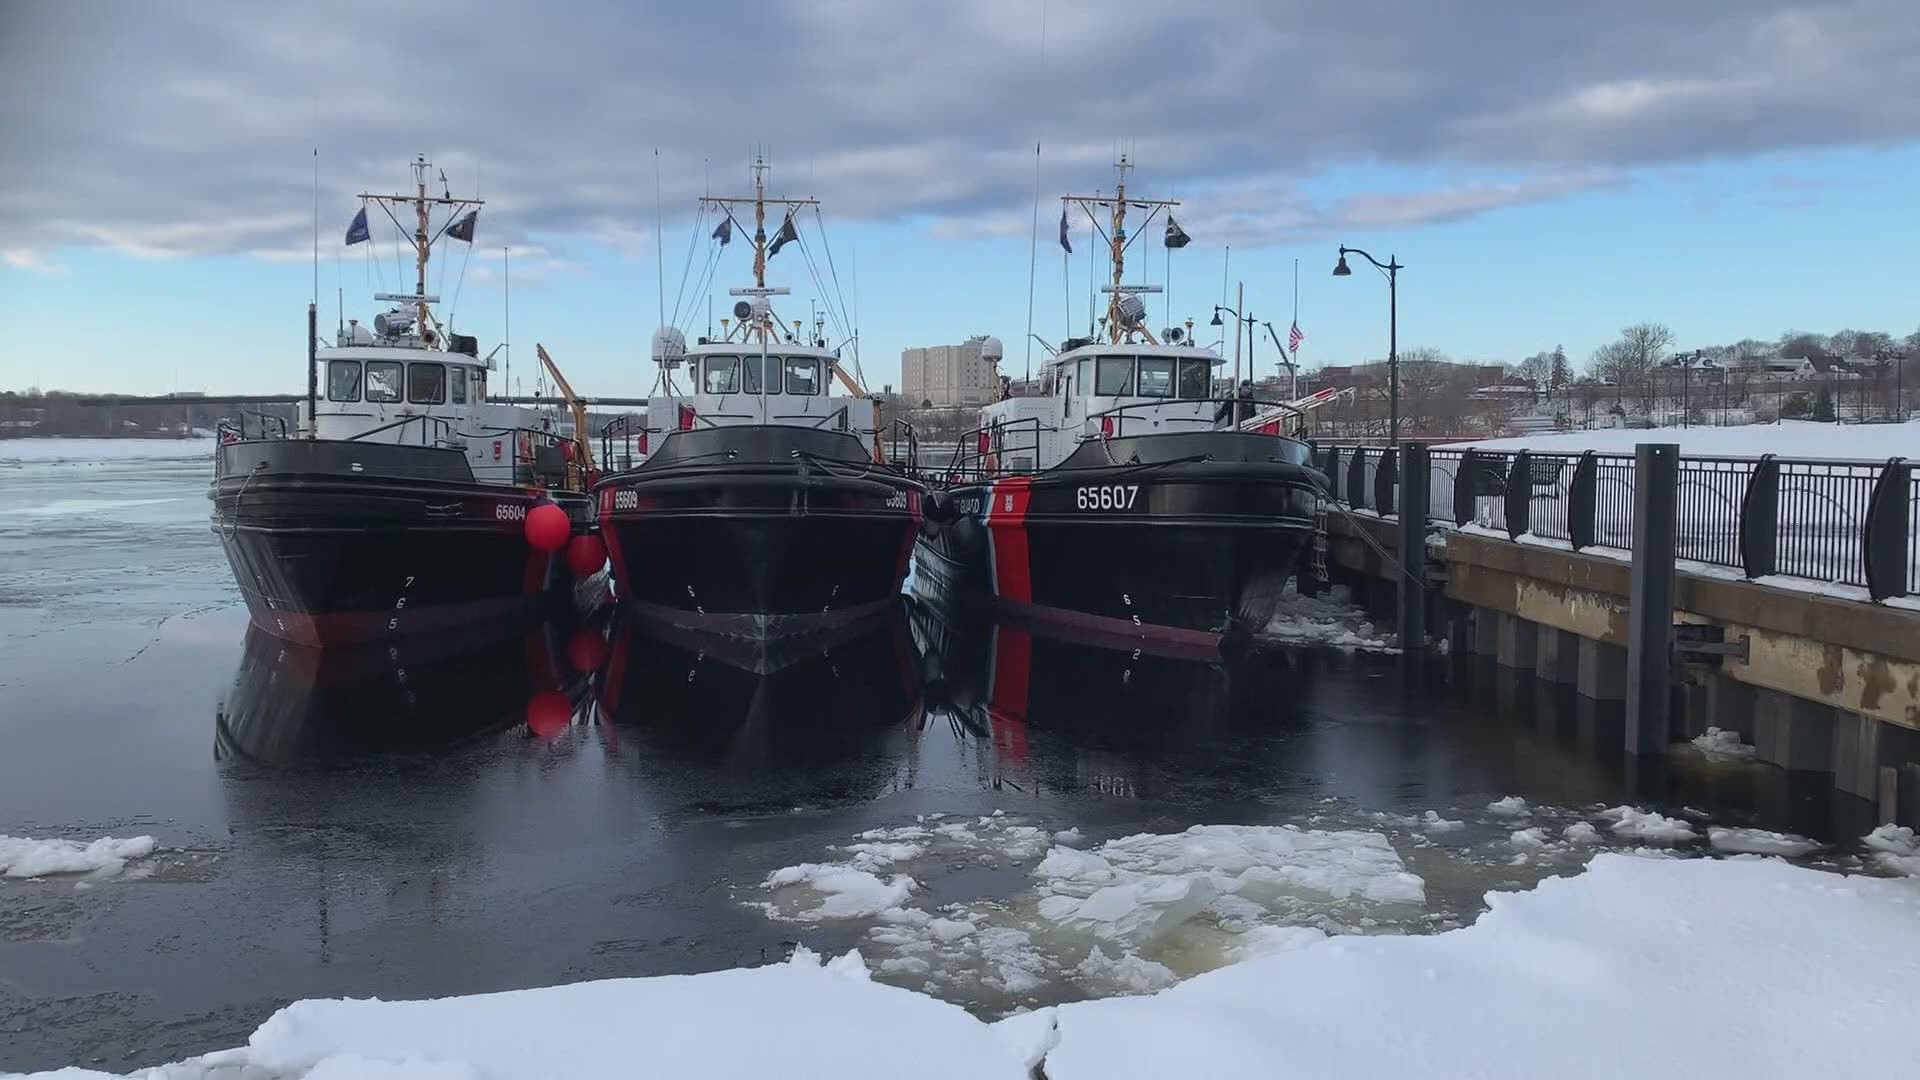 The ships usually arrive every two weeks to break up the river's ice, making sure that the water is clear for any emergency situations that might occur.